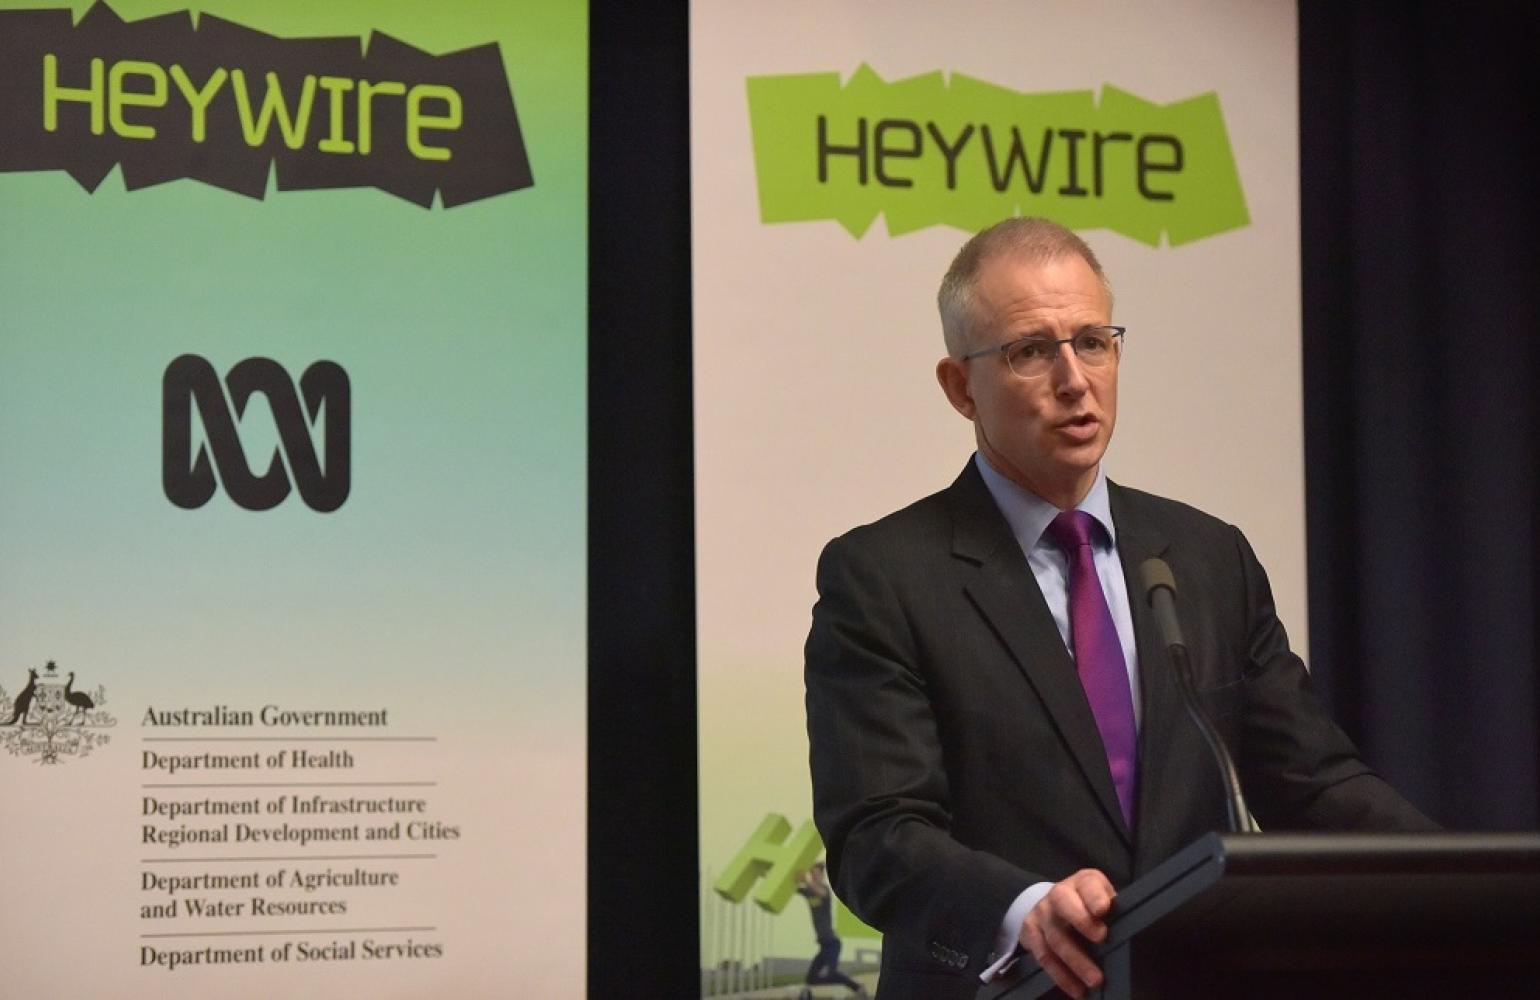 Paul Fletcher speaking at the Heywire Launch